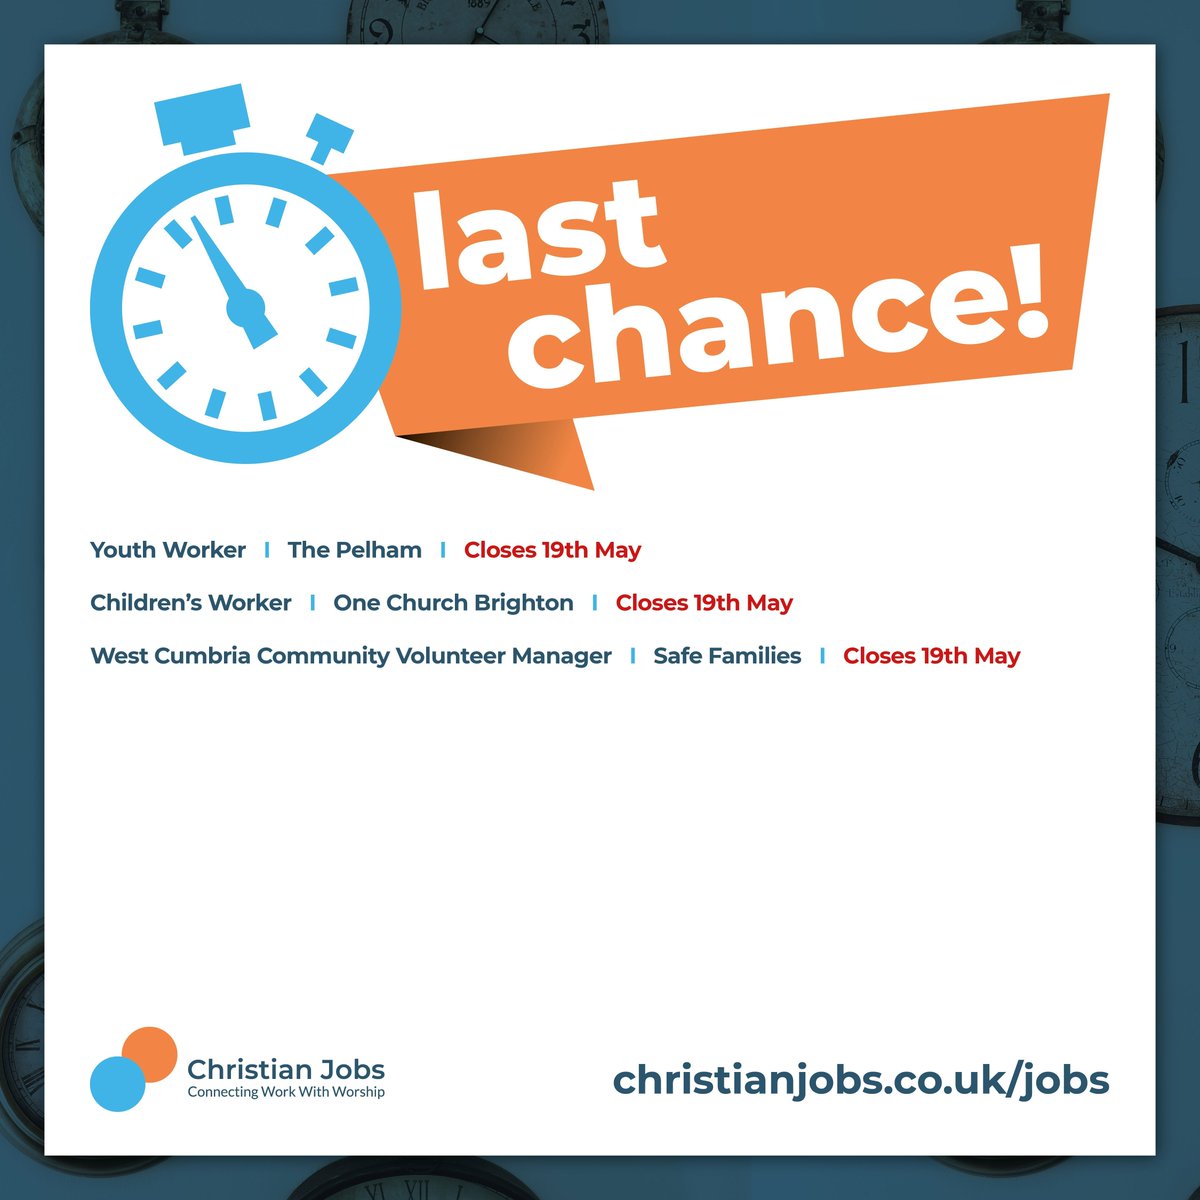 🕐 LAST CHANCE! 🕐 If you're interested in applying for any of the jobs we have on our site, now's the time to do it as there are plenty of them ending this week! Find your next opportunity at christianjobs.co.uk/jobs #UKChristianJobs #NewJob #JobSearch #ChristianJobs #Jobs